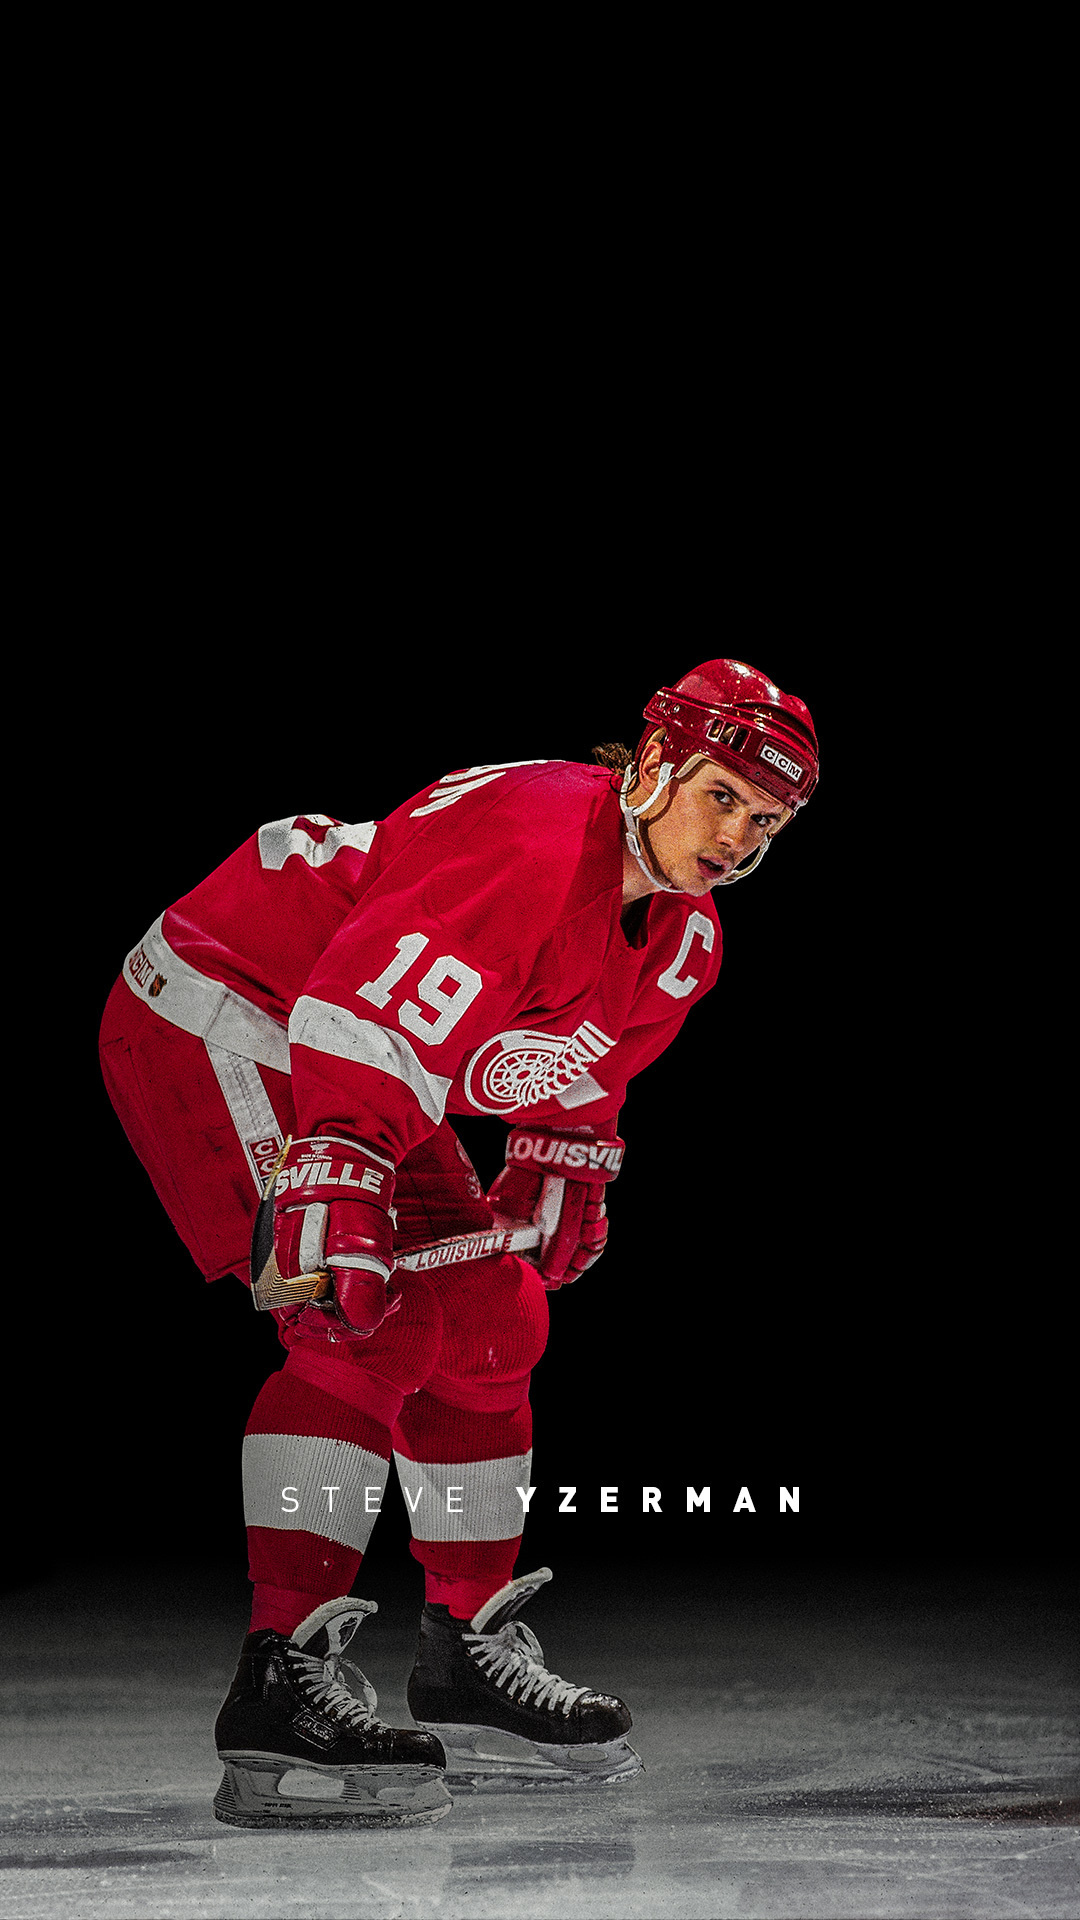 Detroit Red Wings: Steve Yzerman captained the team from 1986 until his retirement in 2006. 1080x1920 Full HD Background.